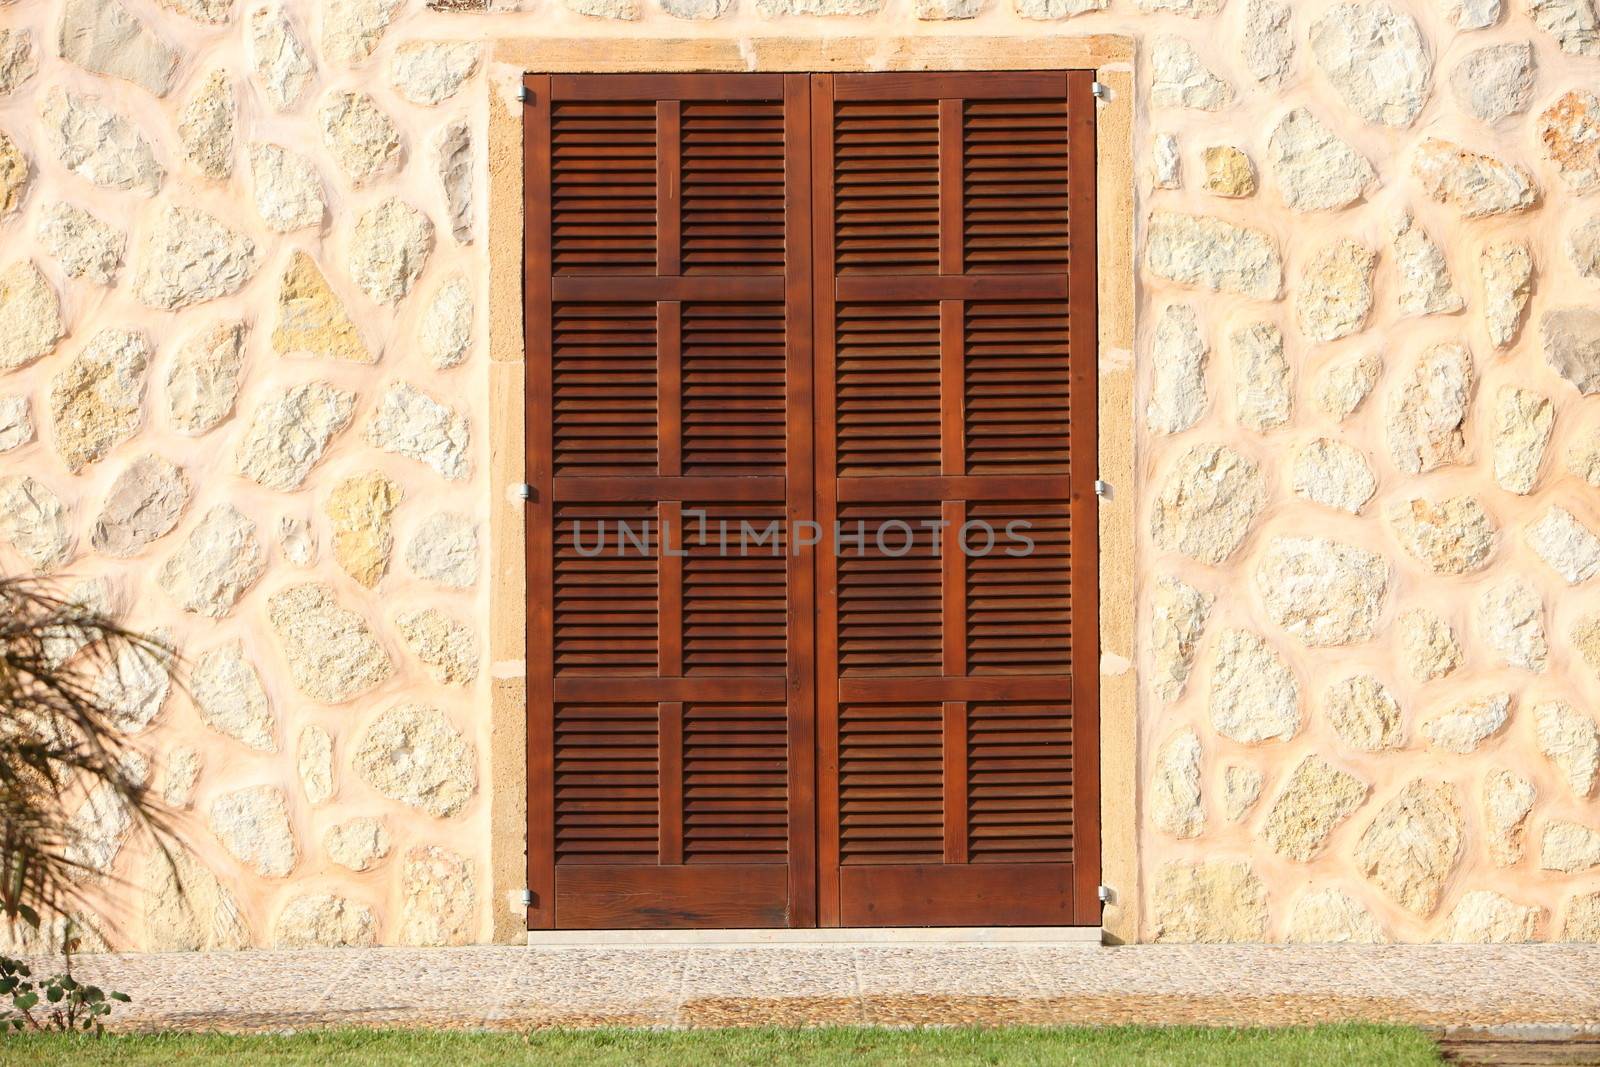 Shuttered wooden window in a stone building with walls composed of painted natural rock